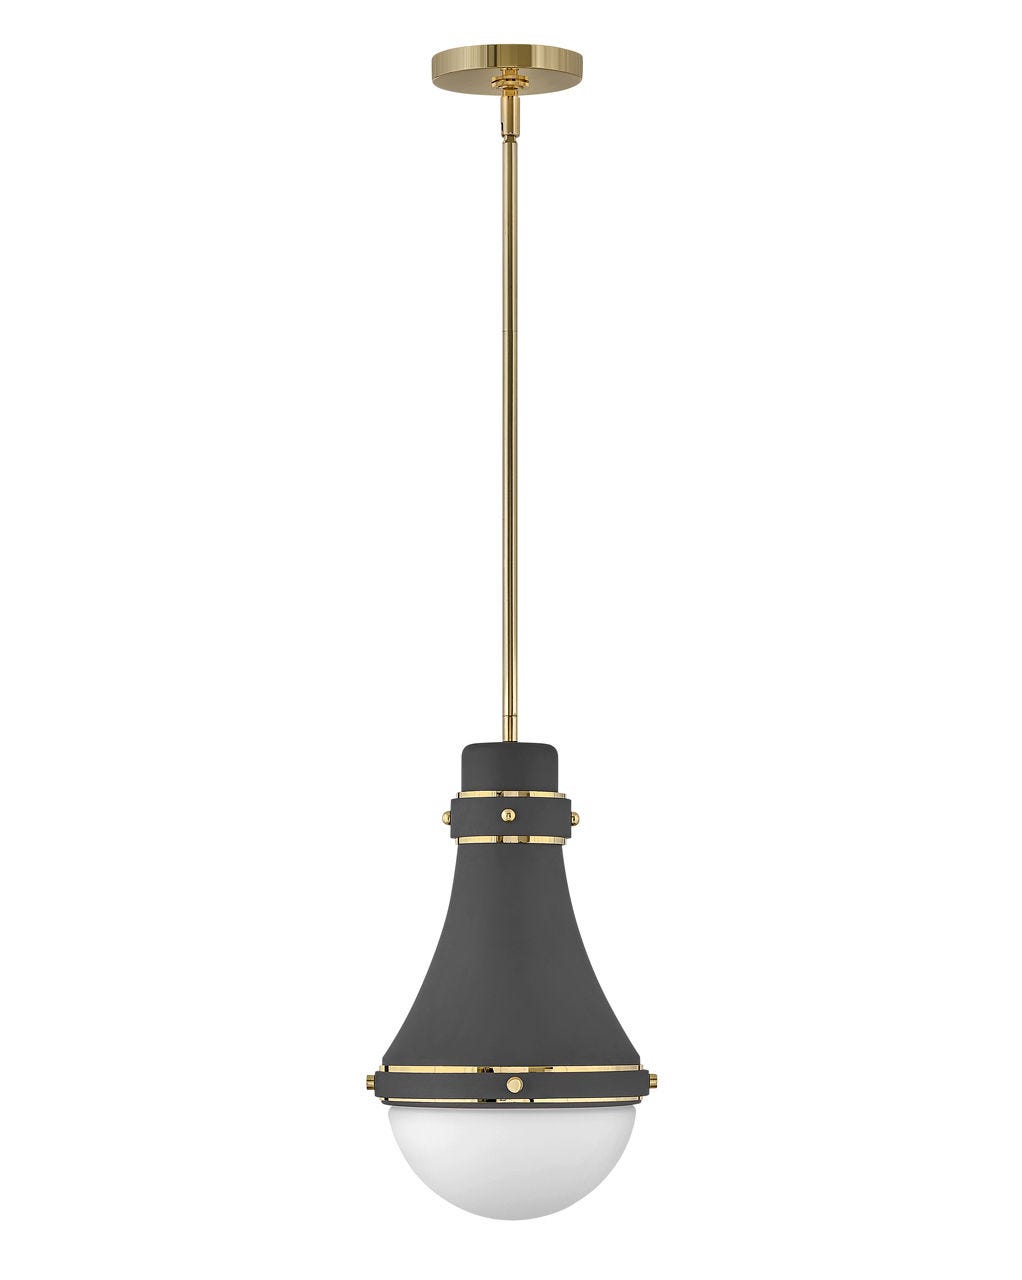 HInkley Oliver Small Pendant